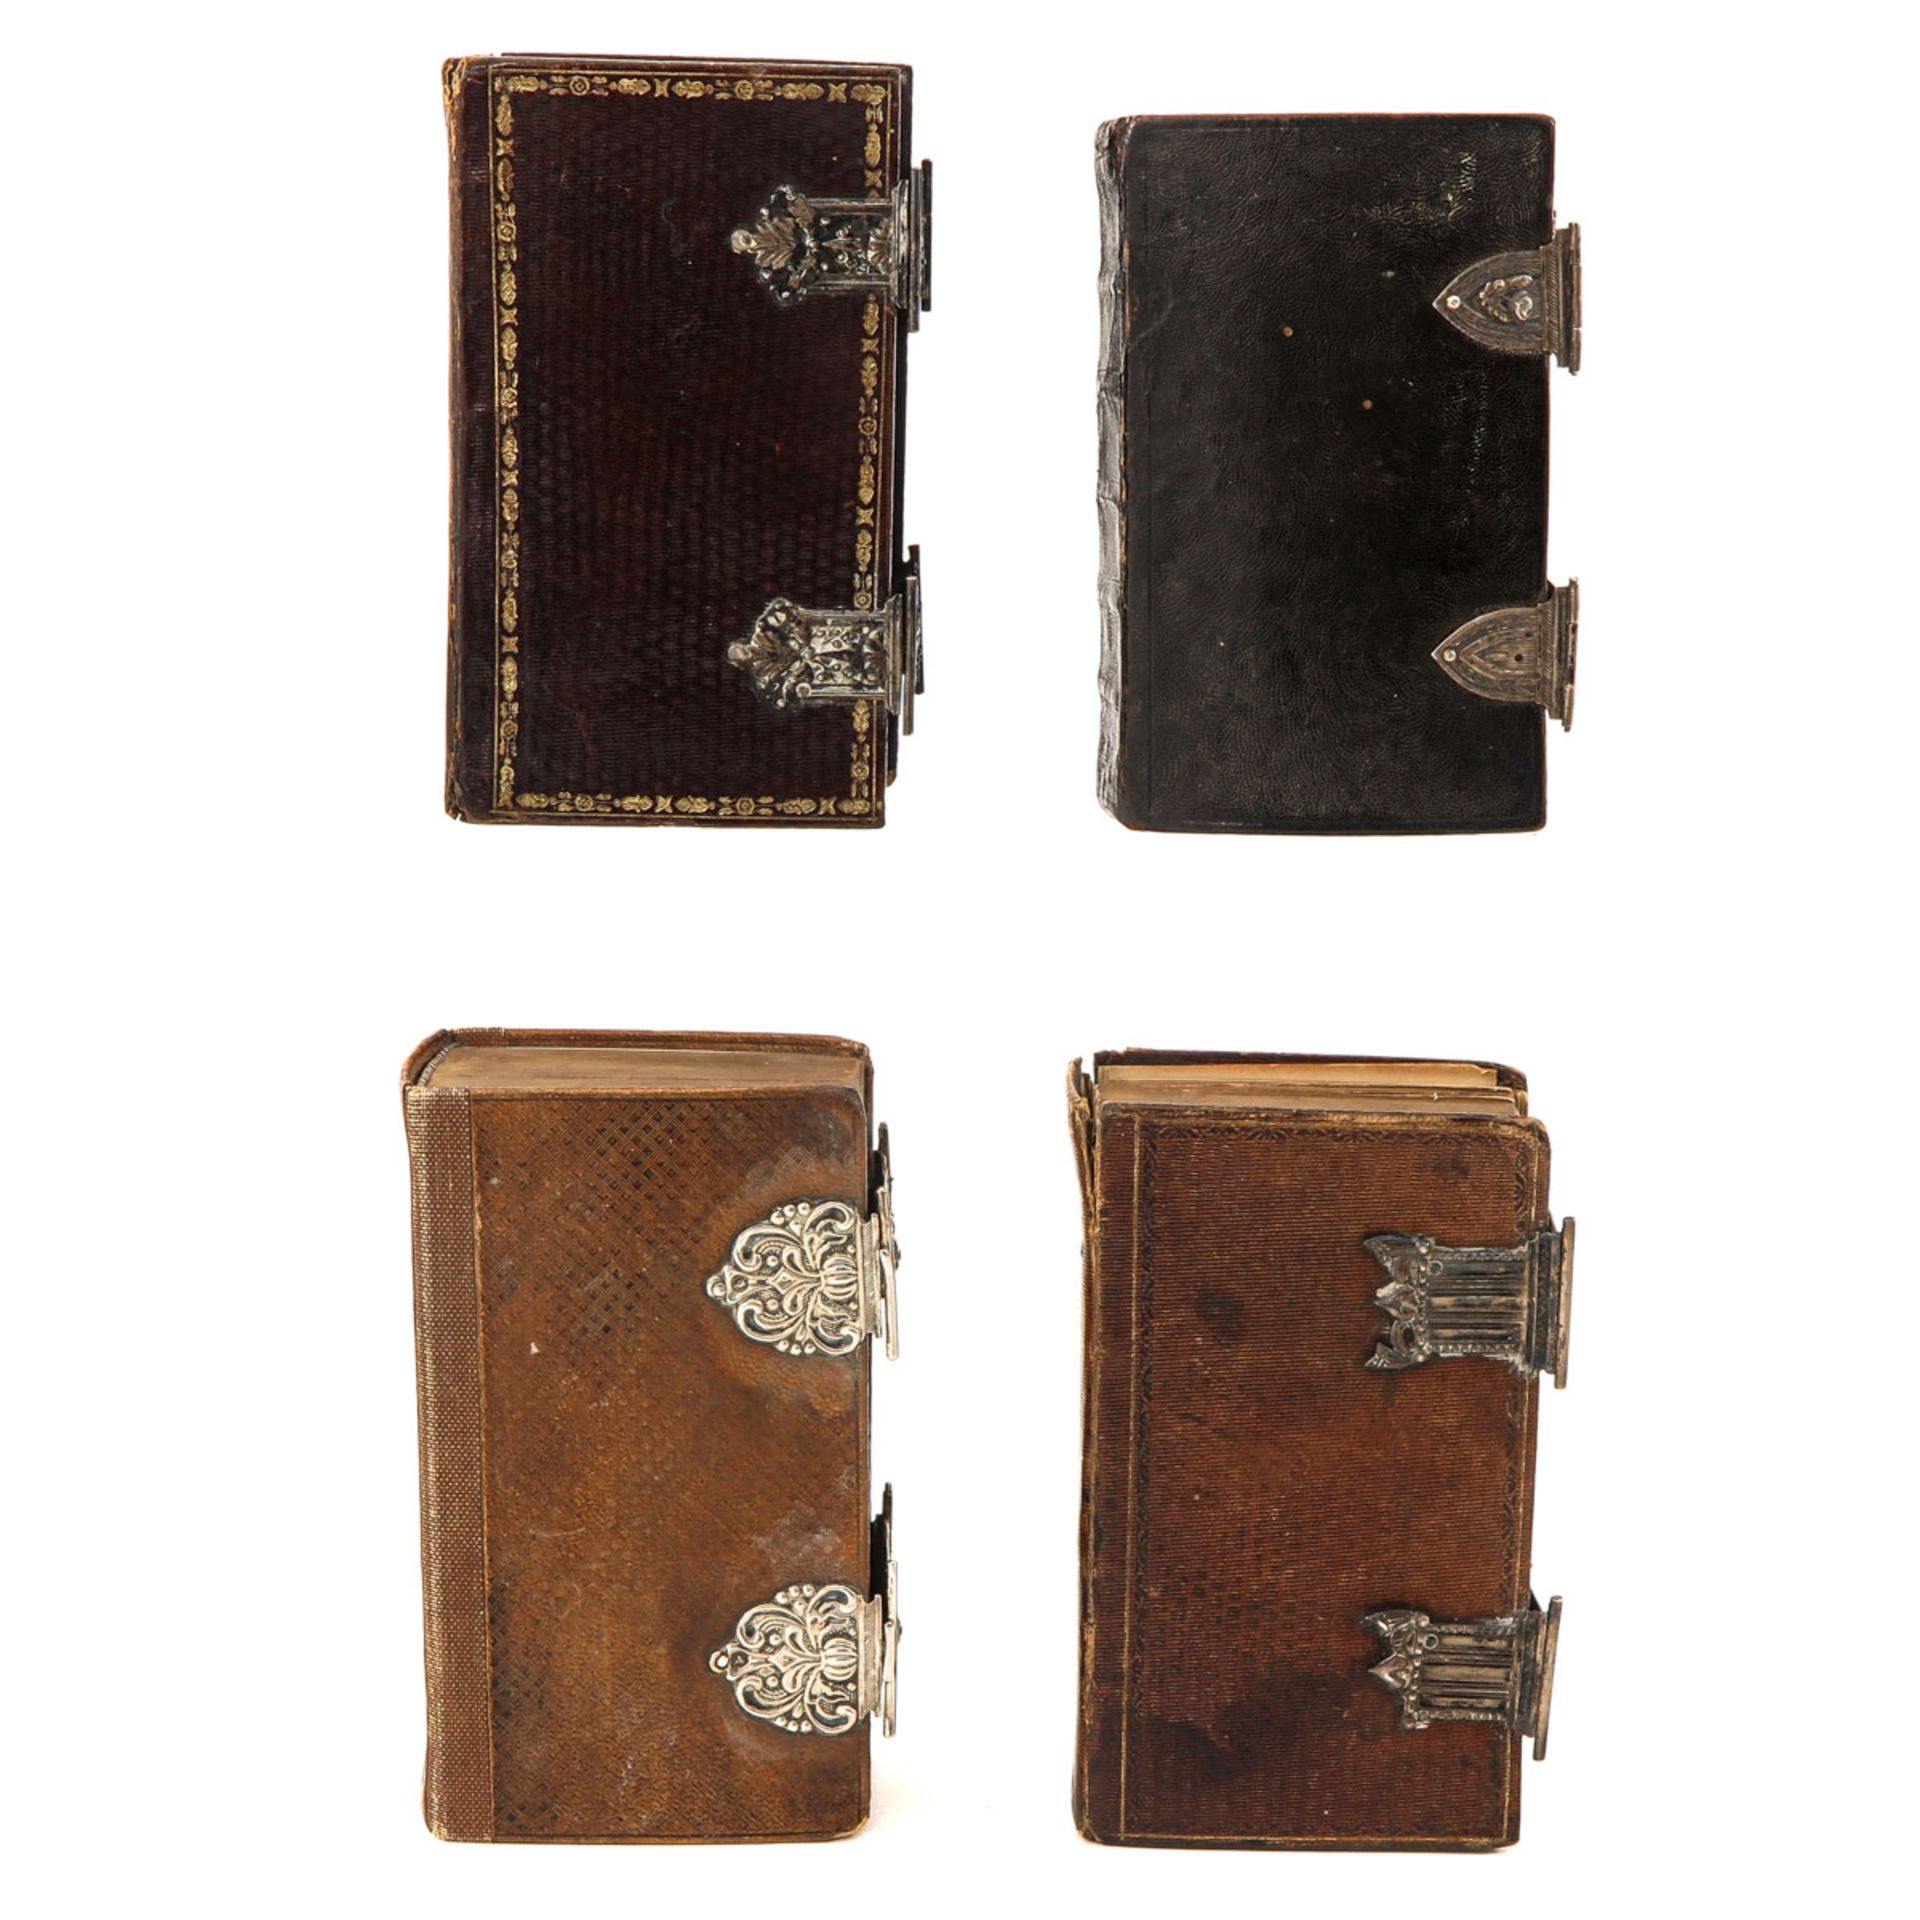 A Collection of 4 Bibles - Image 4 of 10